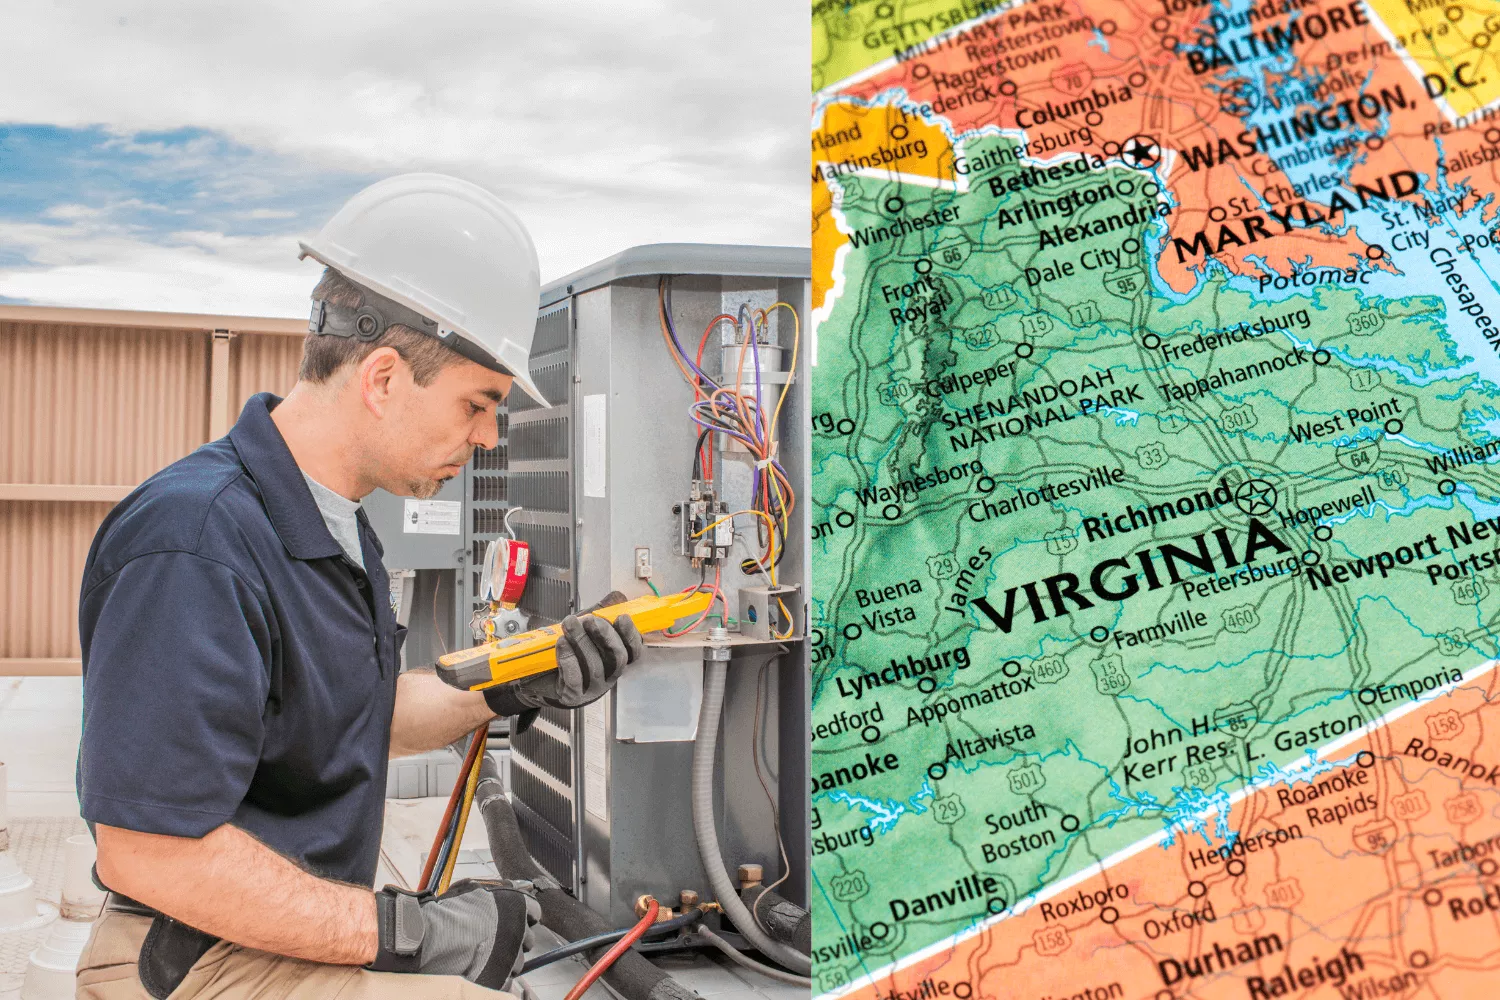 Virginia HVAC License: How to Start Your Career as an HVAC Professional in Virginia